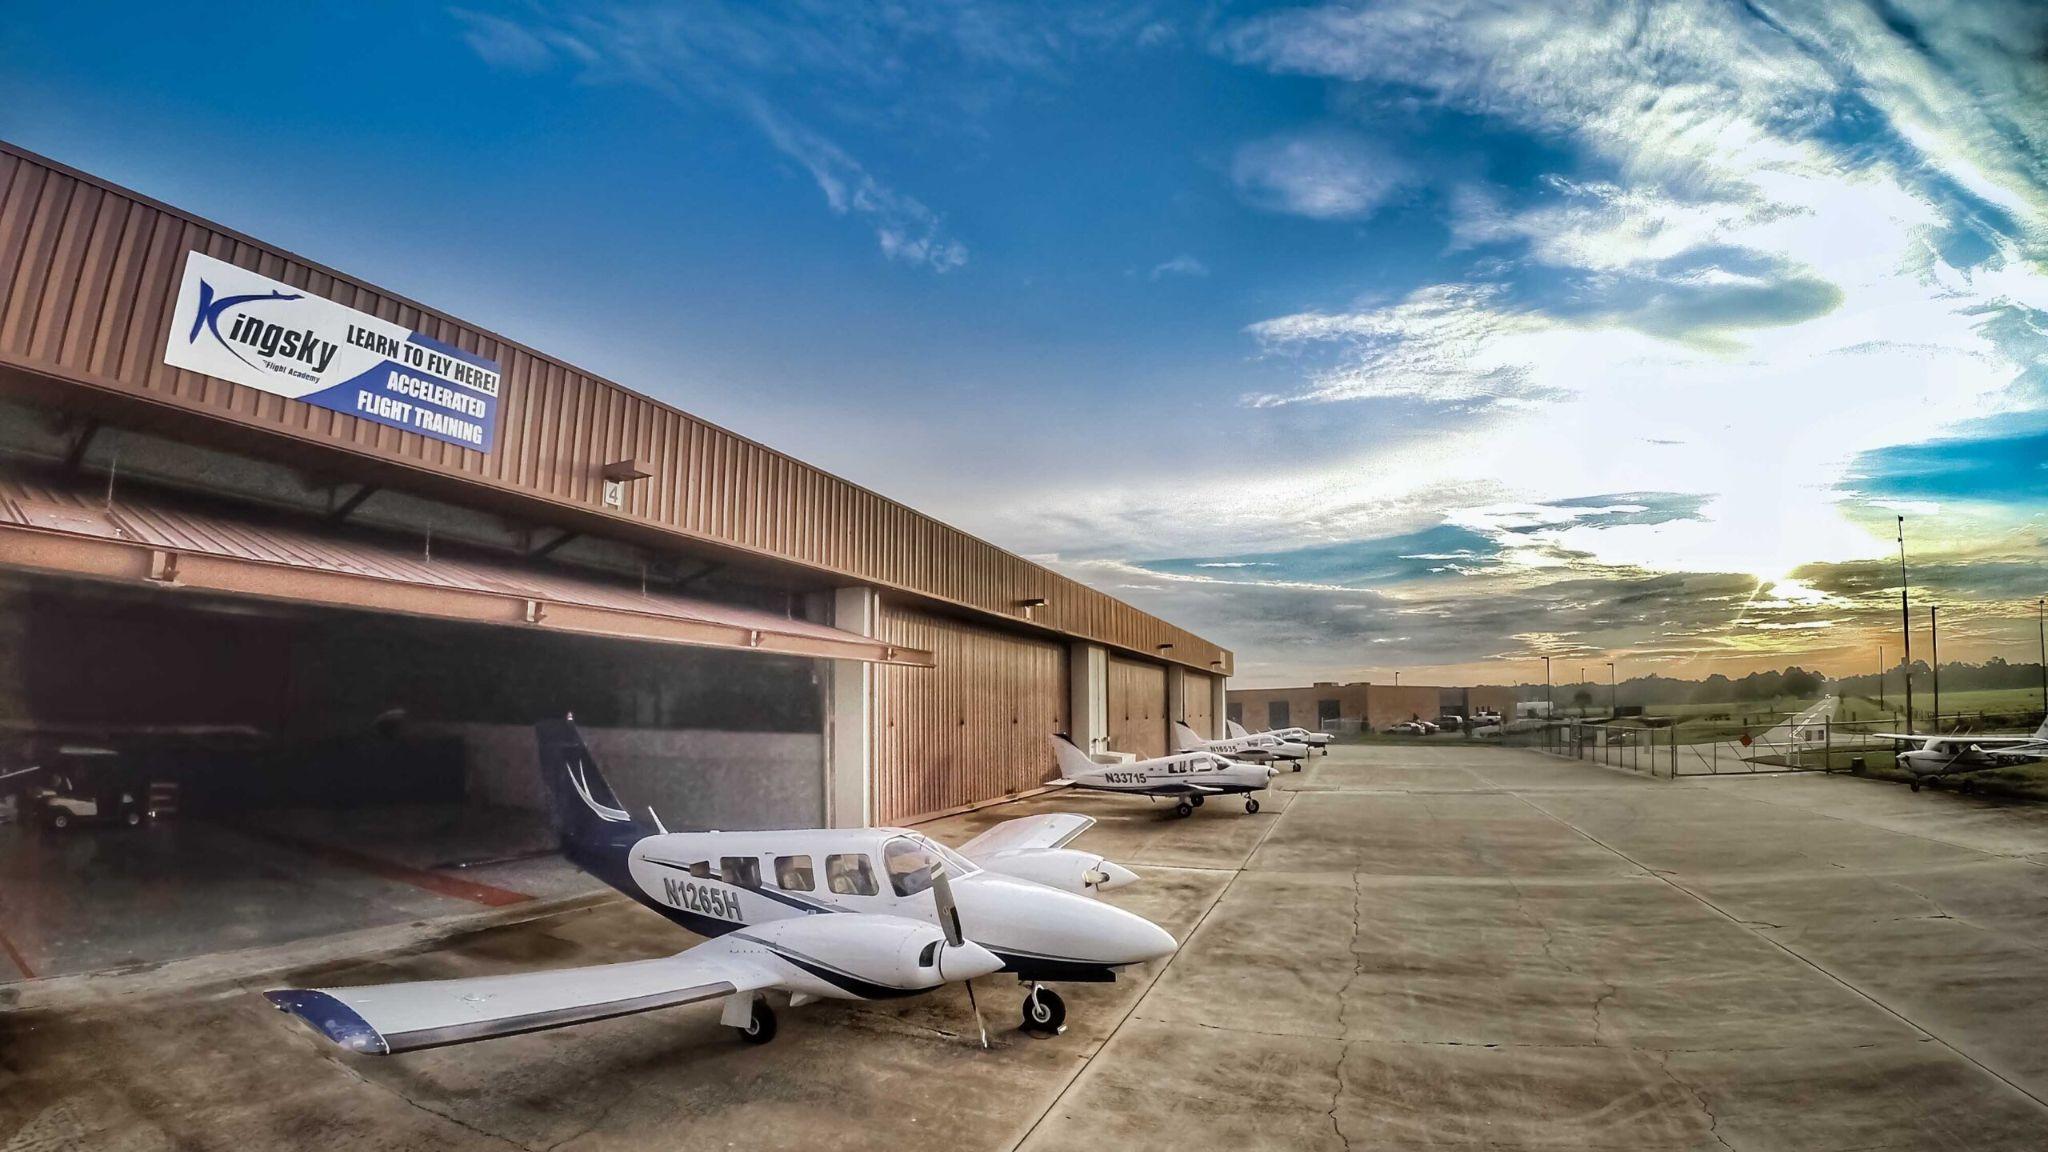 Private airplanes on tarmac at Kingsky Flight Academy. 